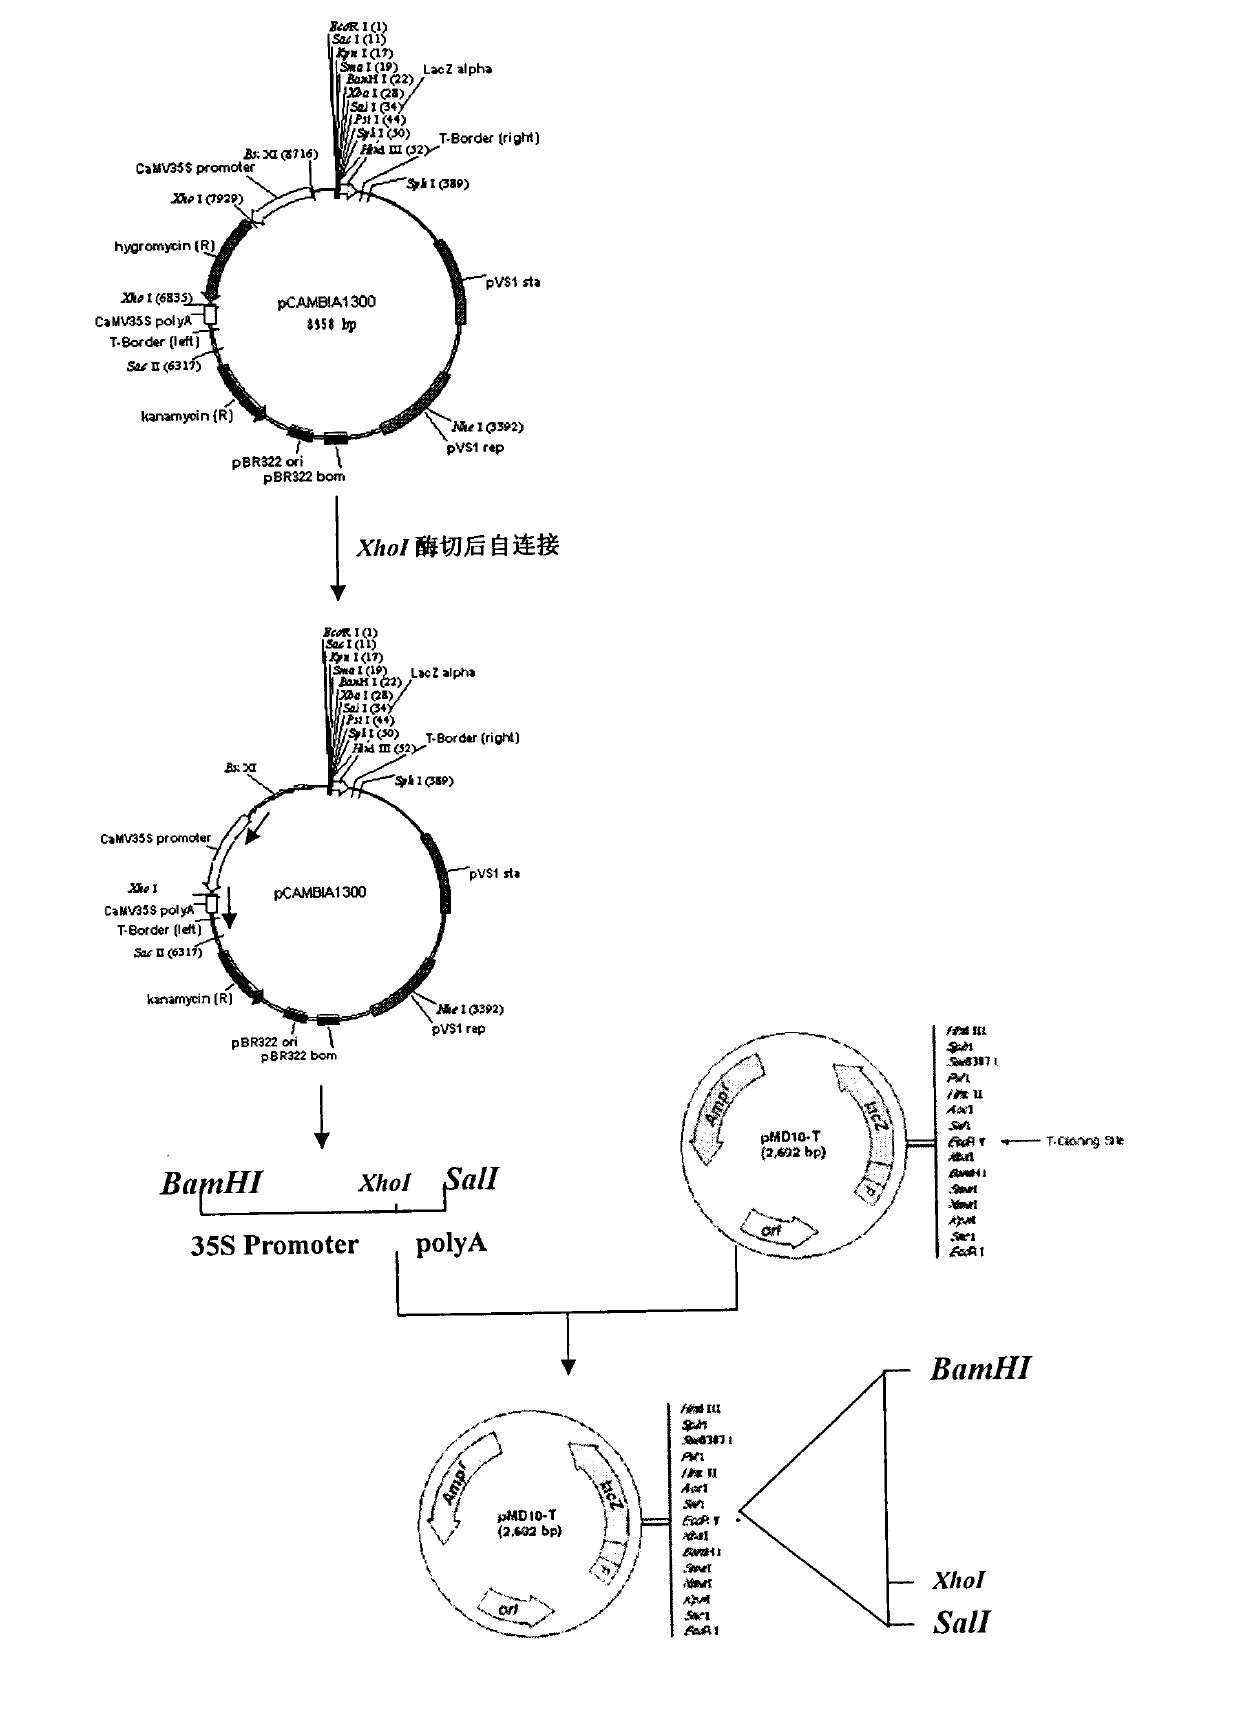 Method for constructing a universal plant expression vector